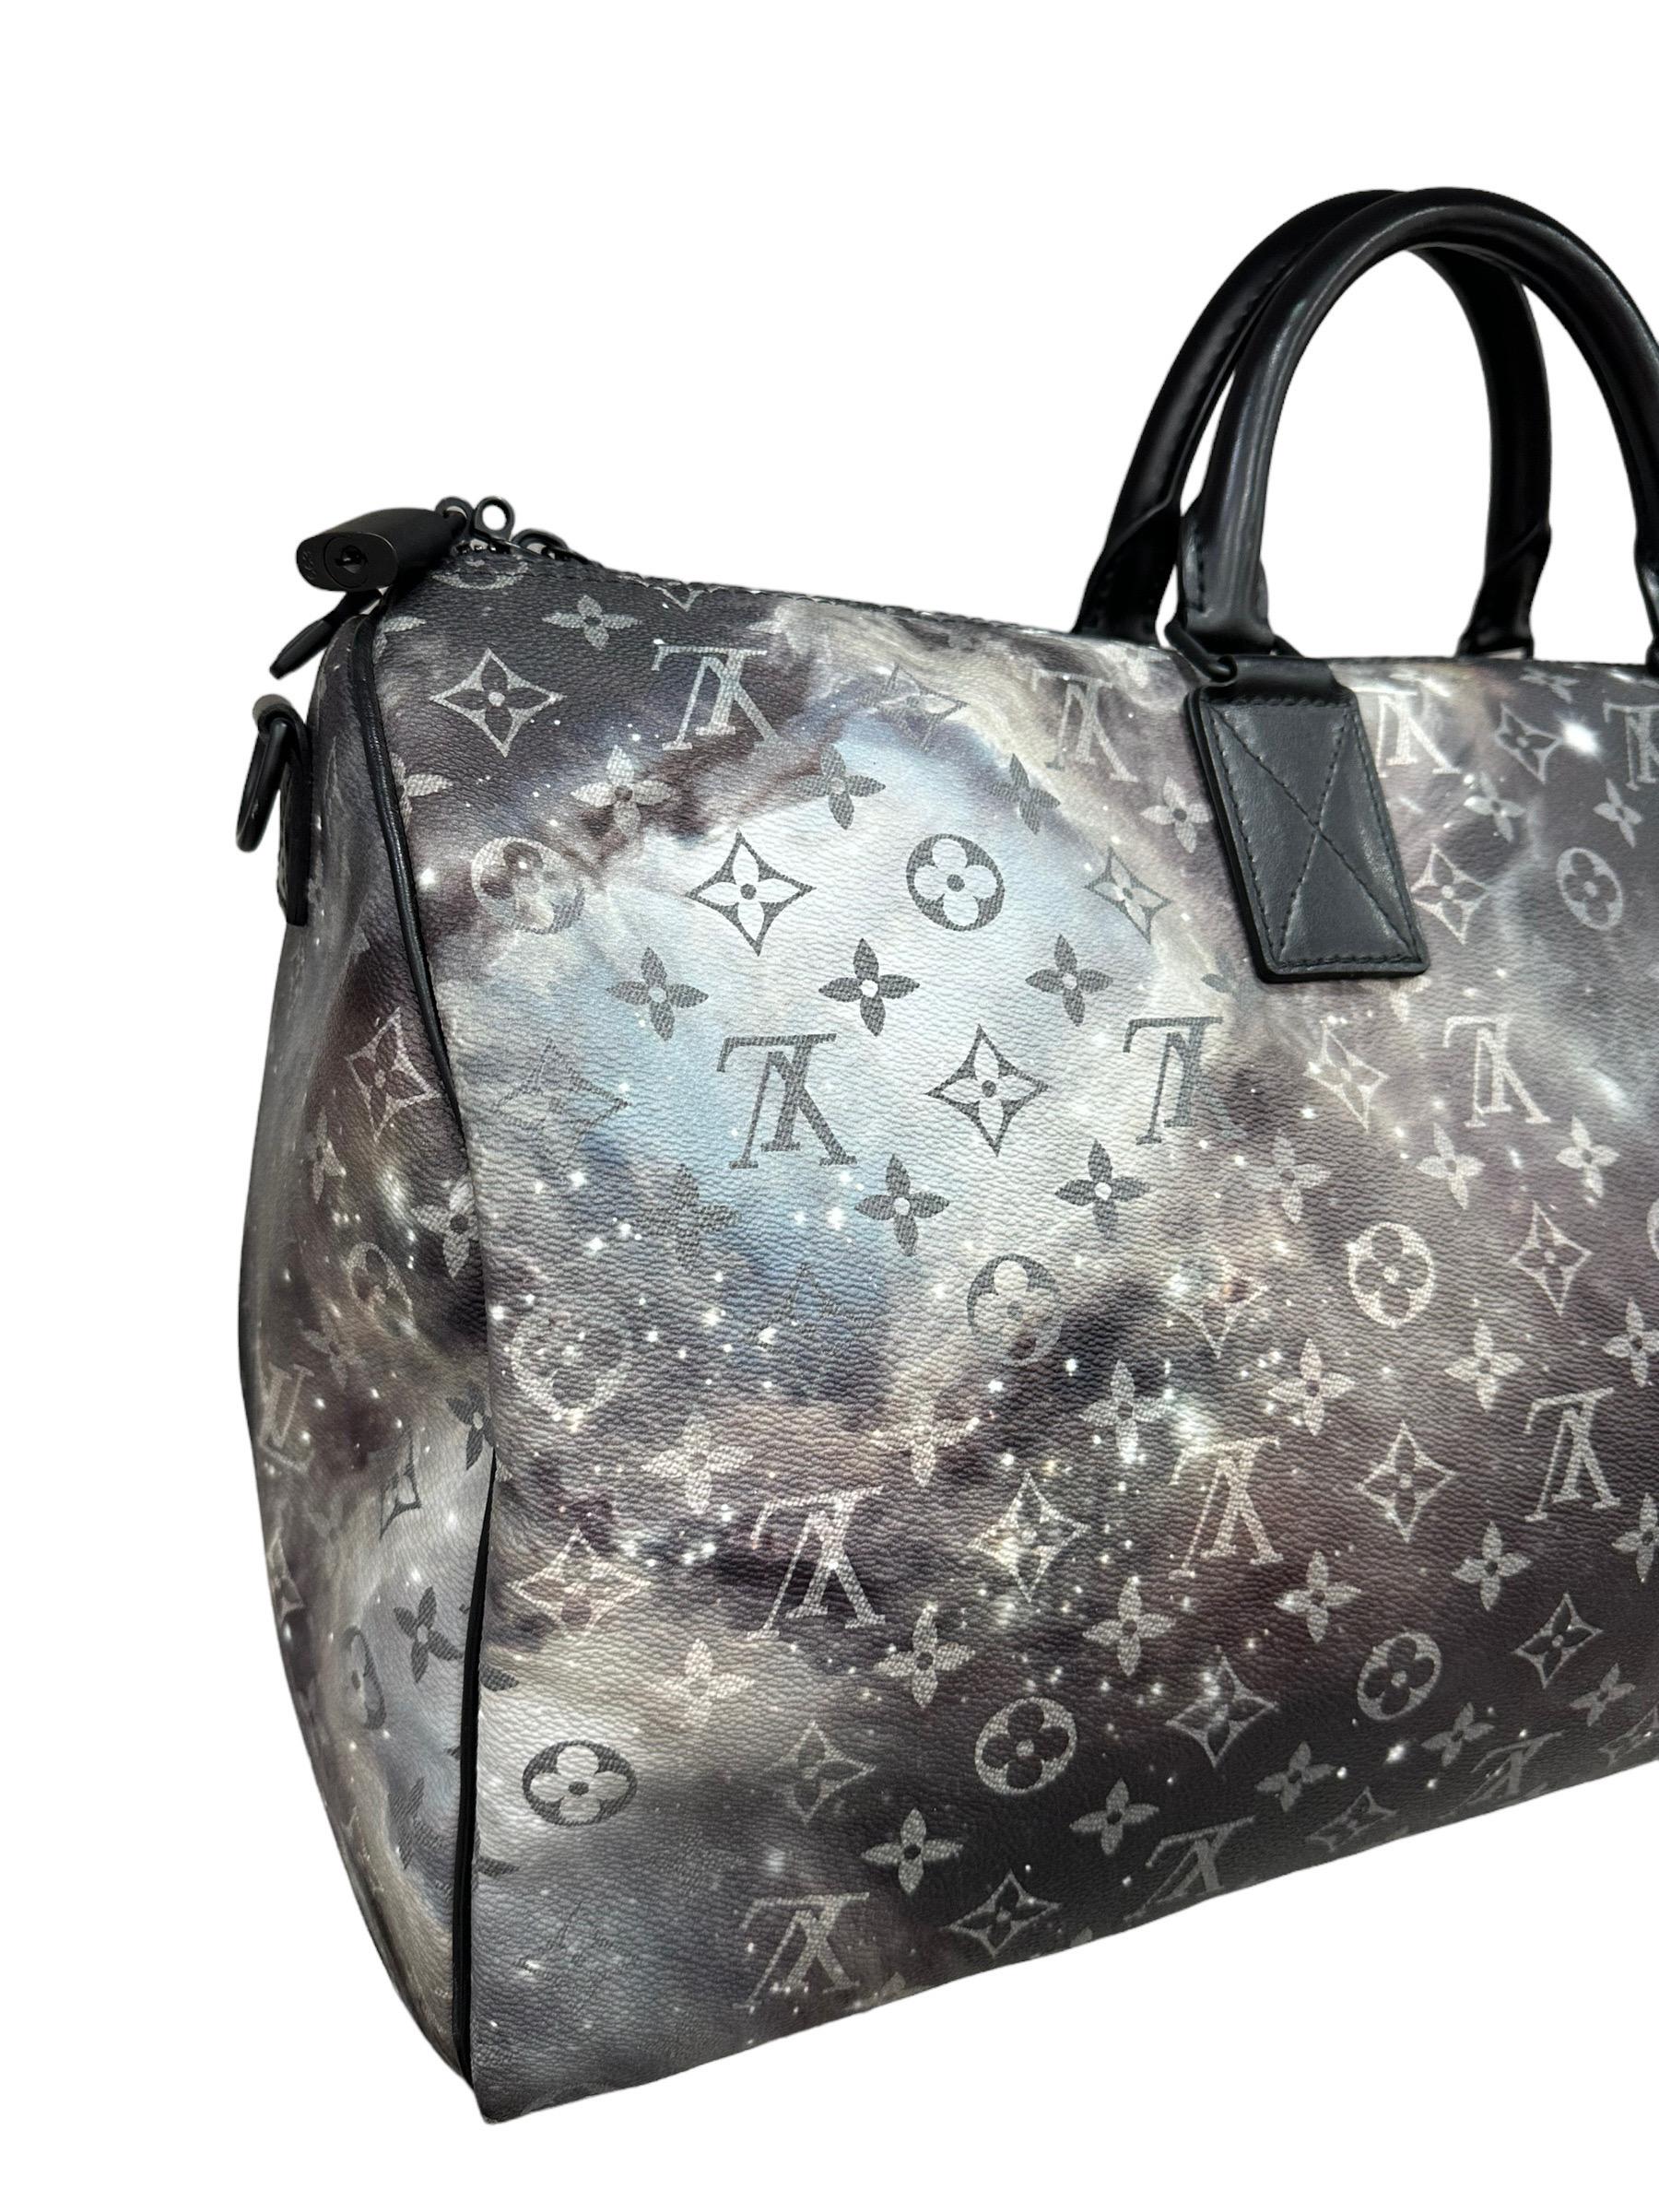 Louis Vuitton Galaxy Keepall Bandouliere 50 Limited Edition Travel Bag For Sale 9